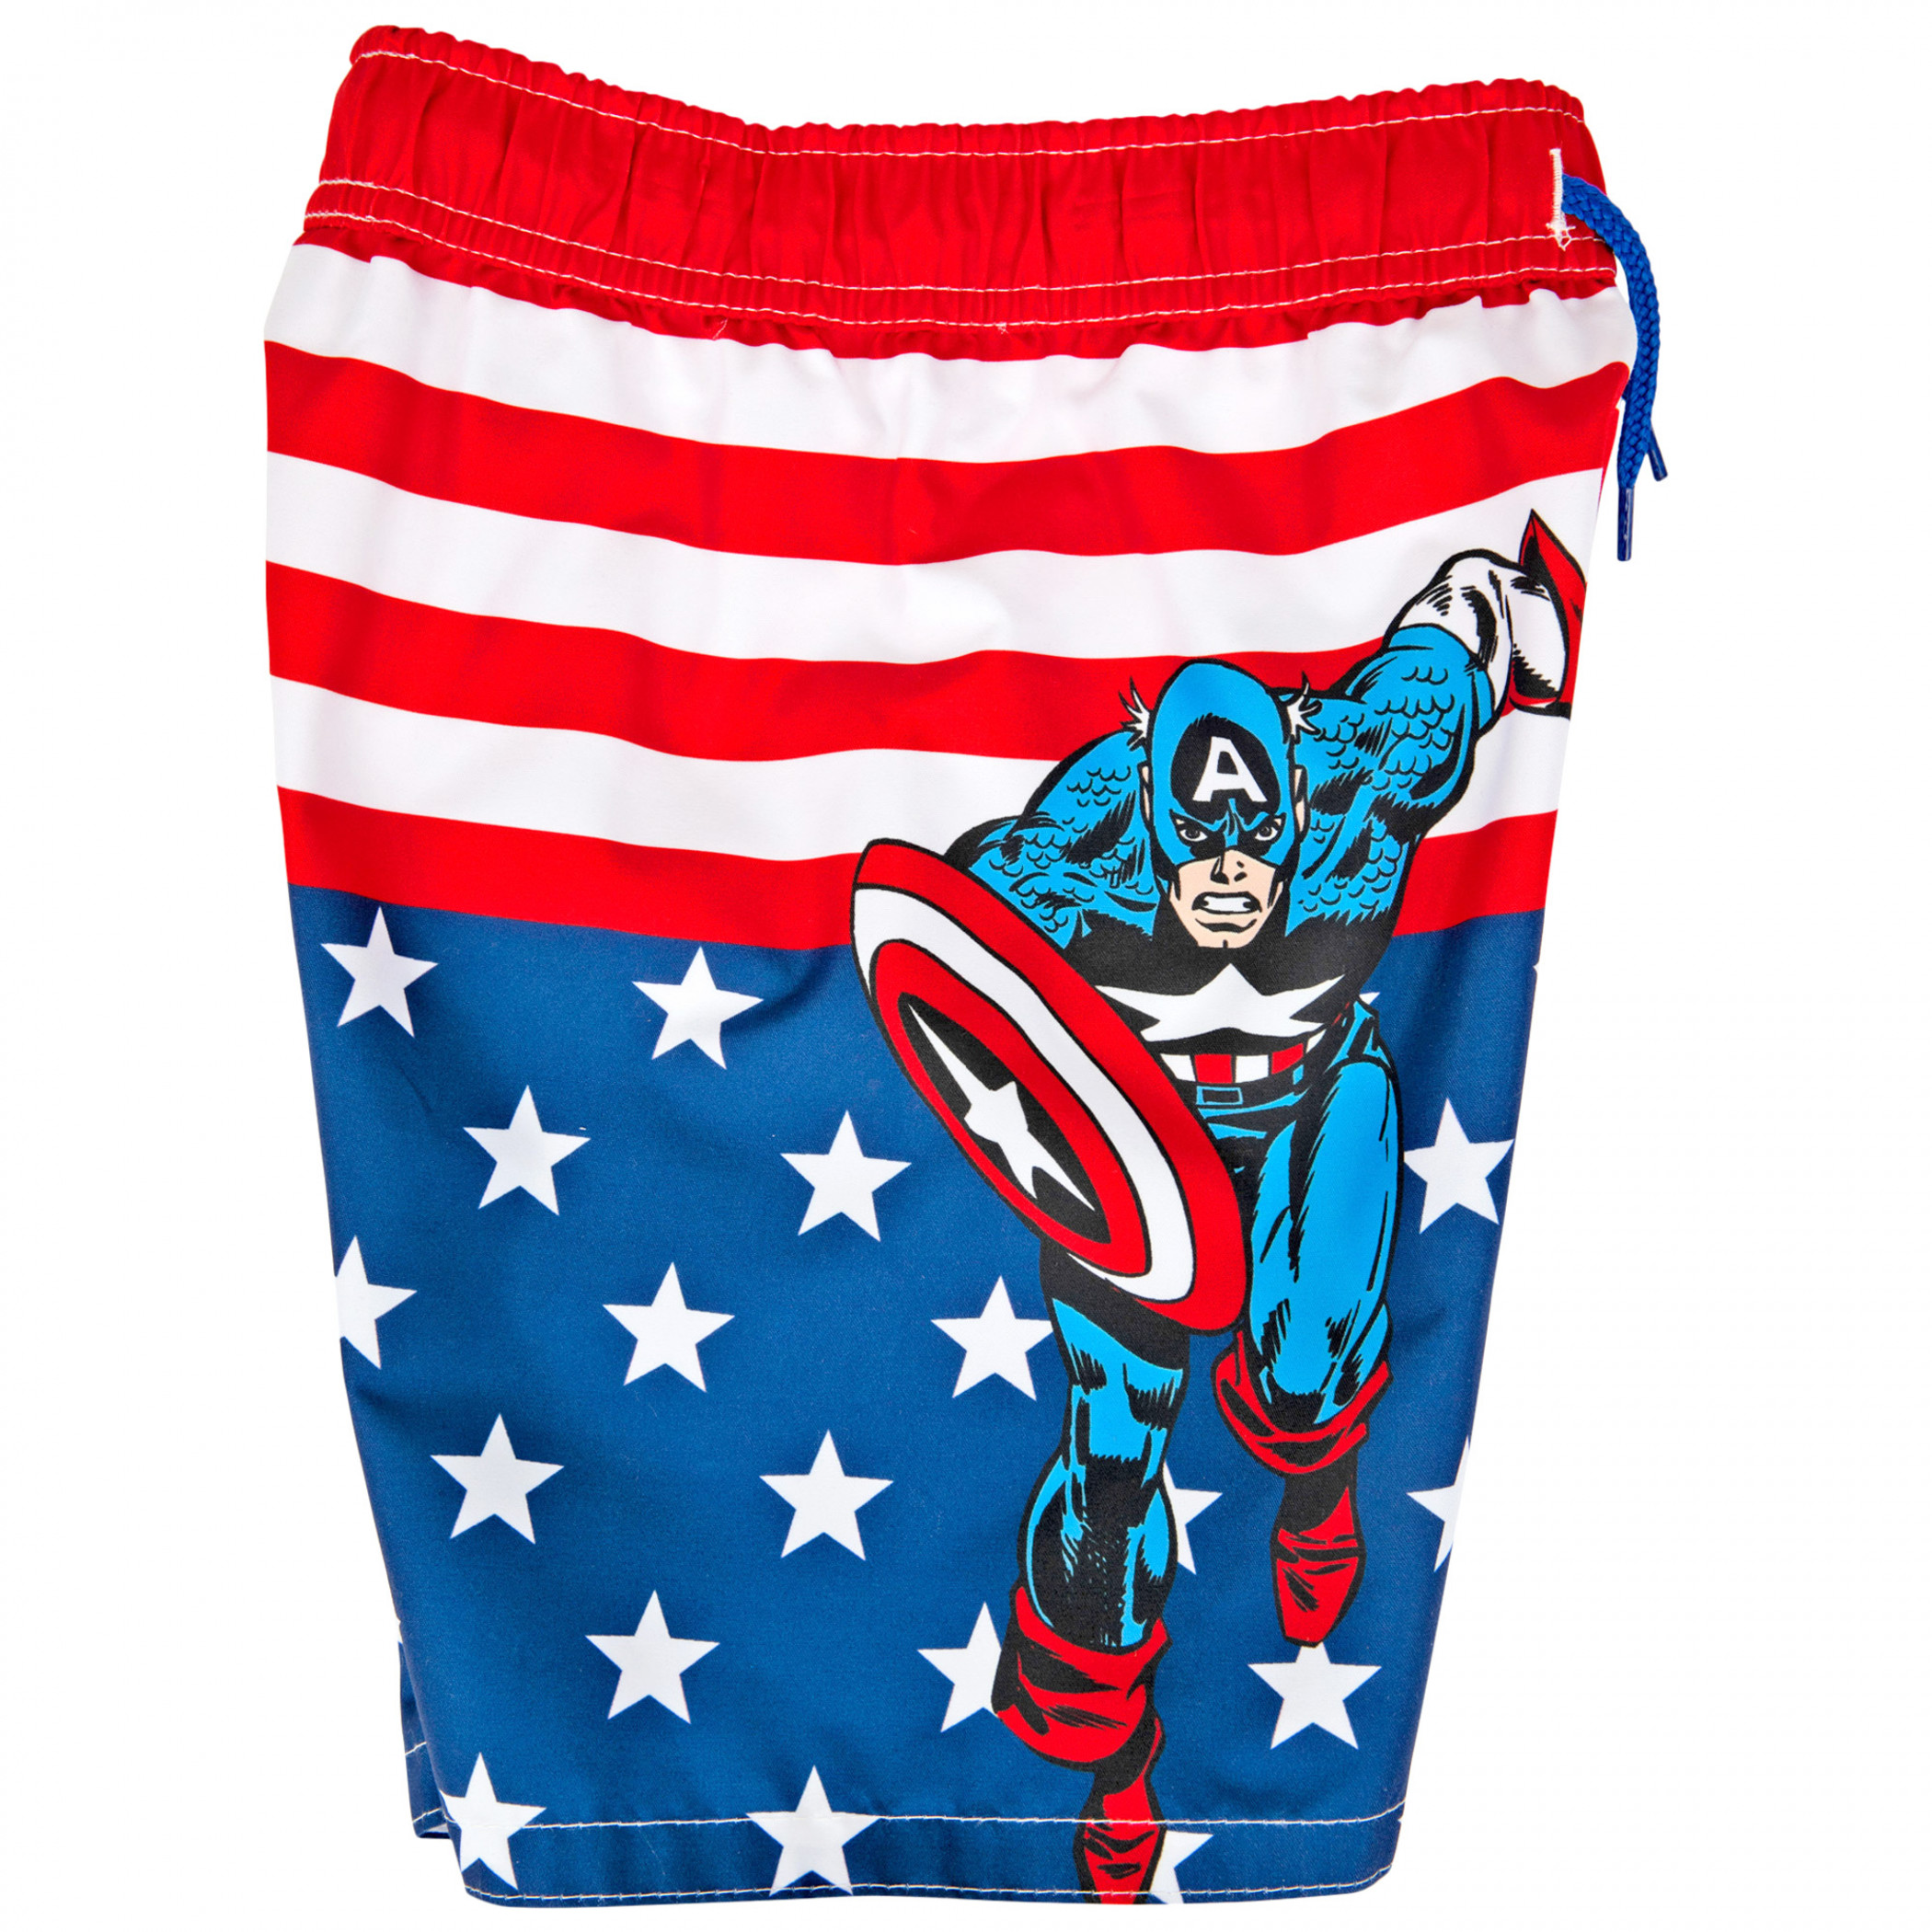 Captain America Character With Stars and Stripes Youth Swim Shorts